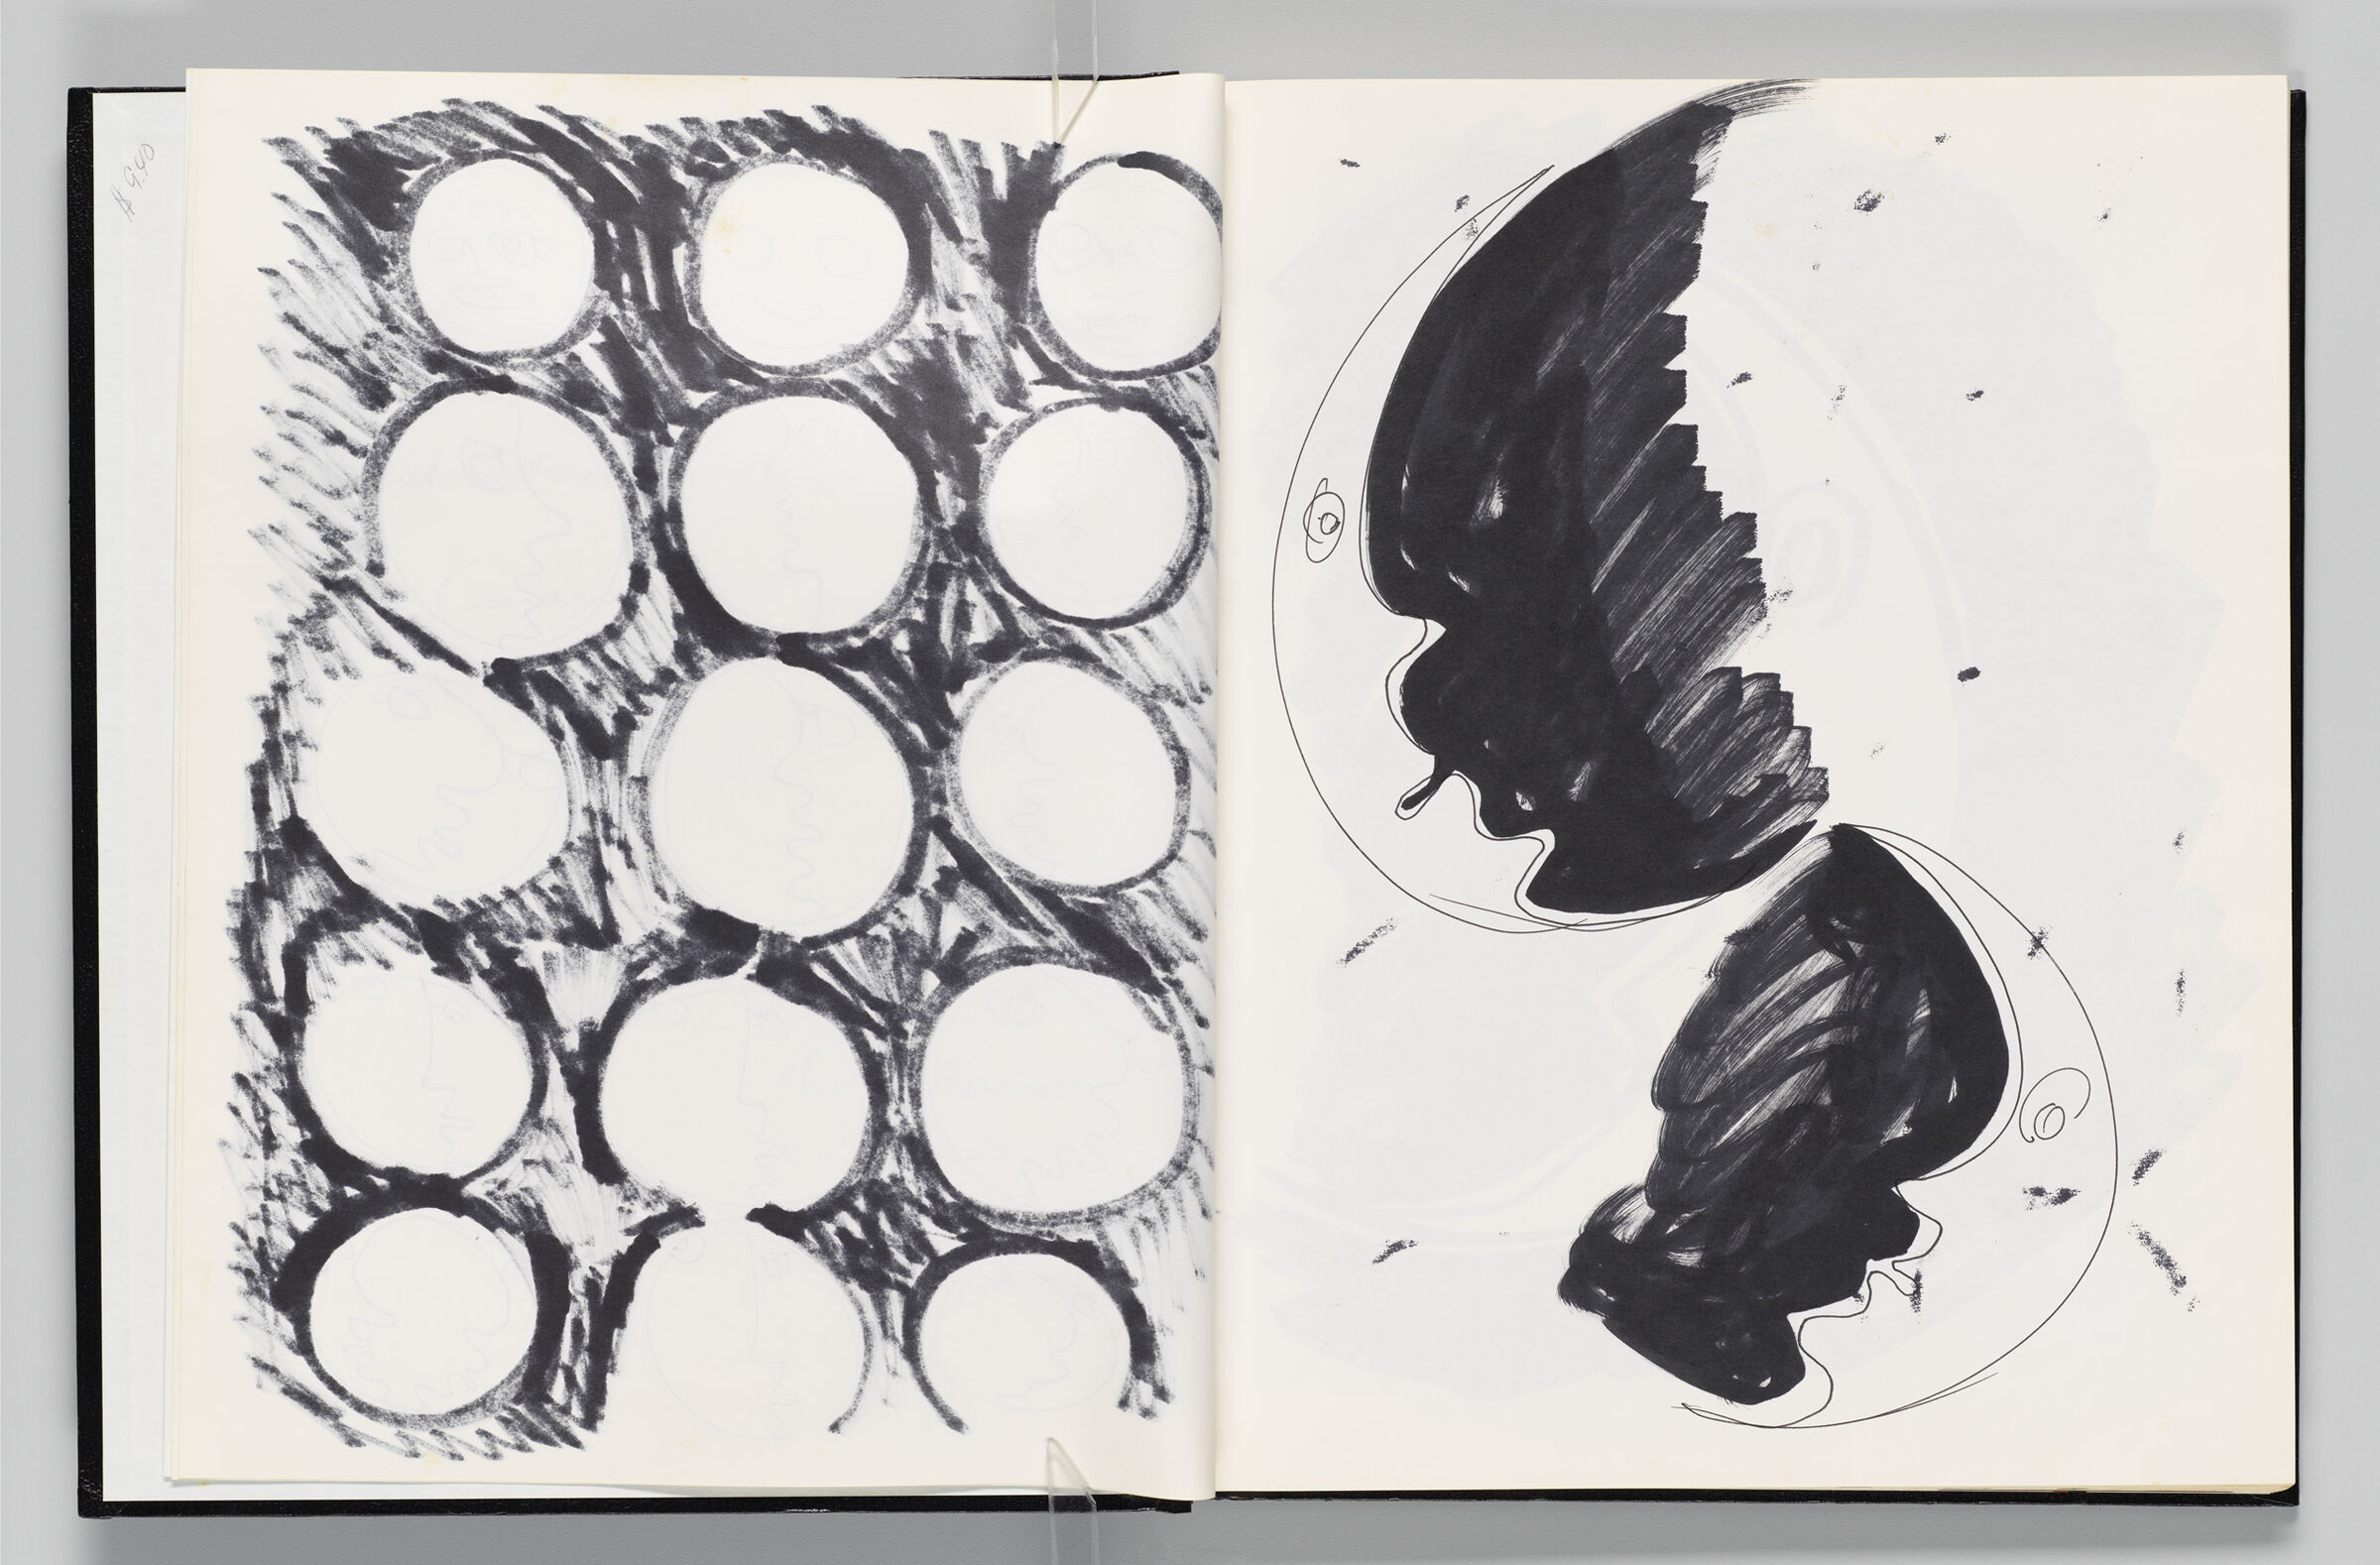 Untitled (Bleed-Through Of Previous Page, Left Page); Untitled (Crescent Moon Faces, Right Page)